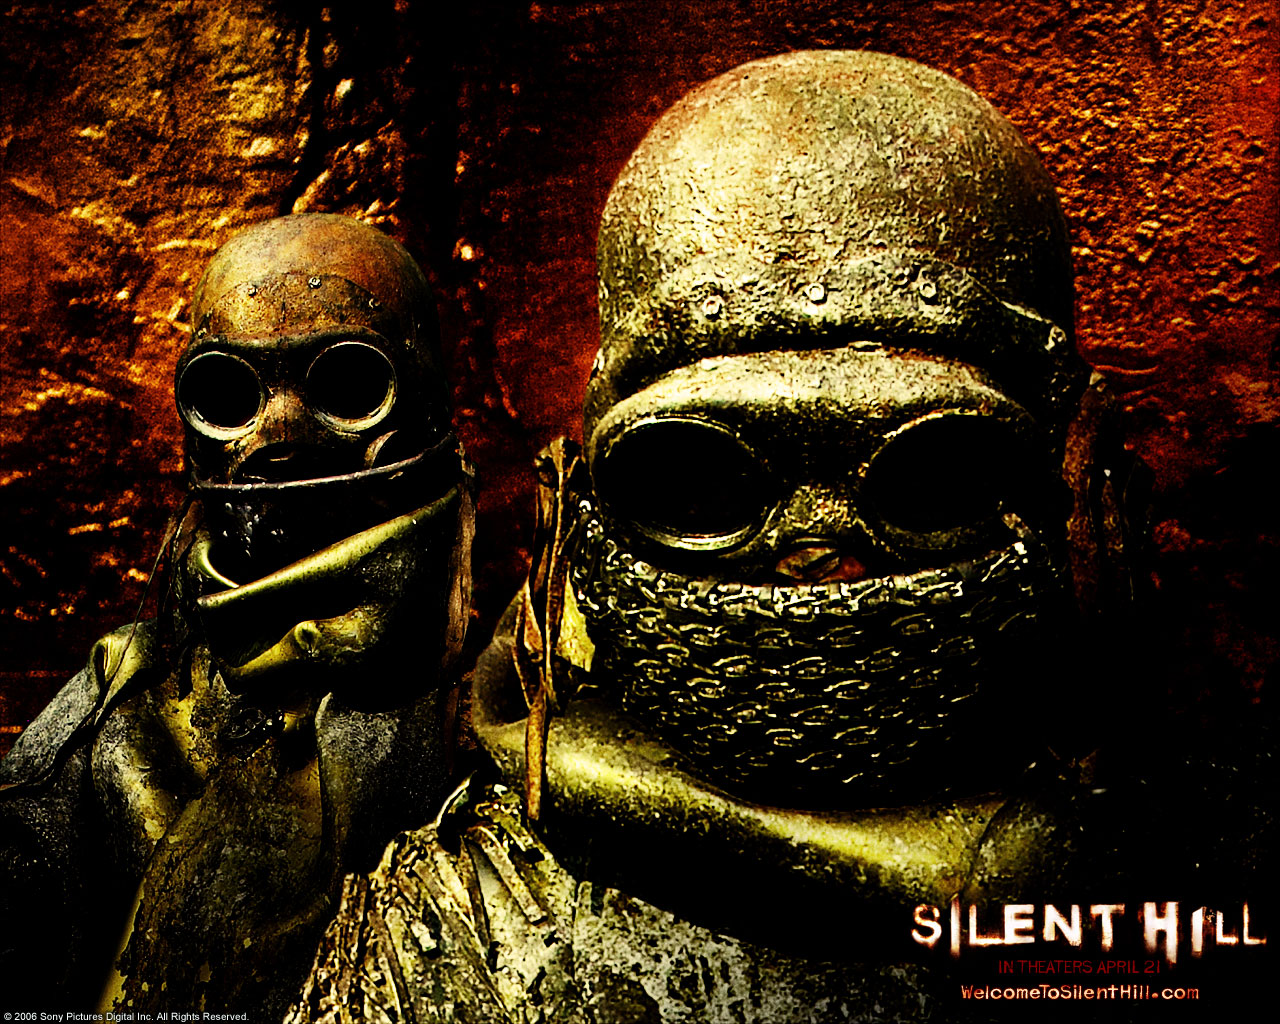 Previous, Movies - Films S - Silent Hill wallpaper